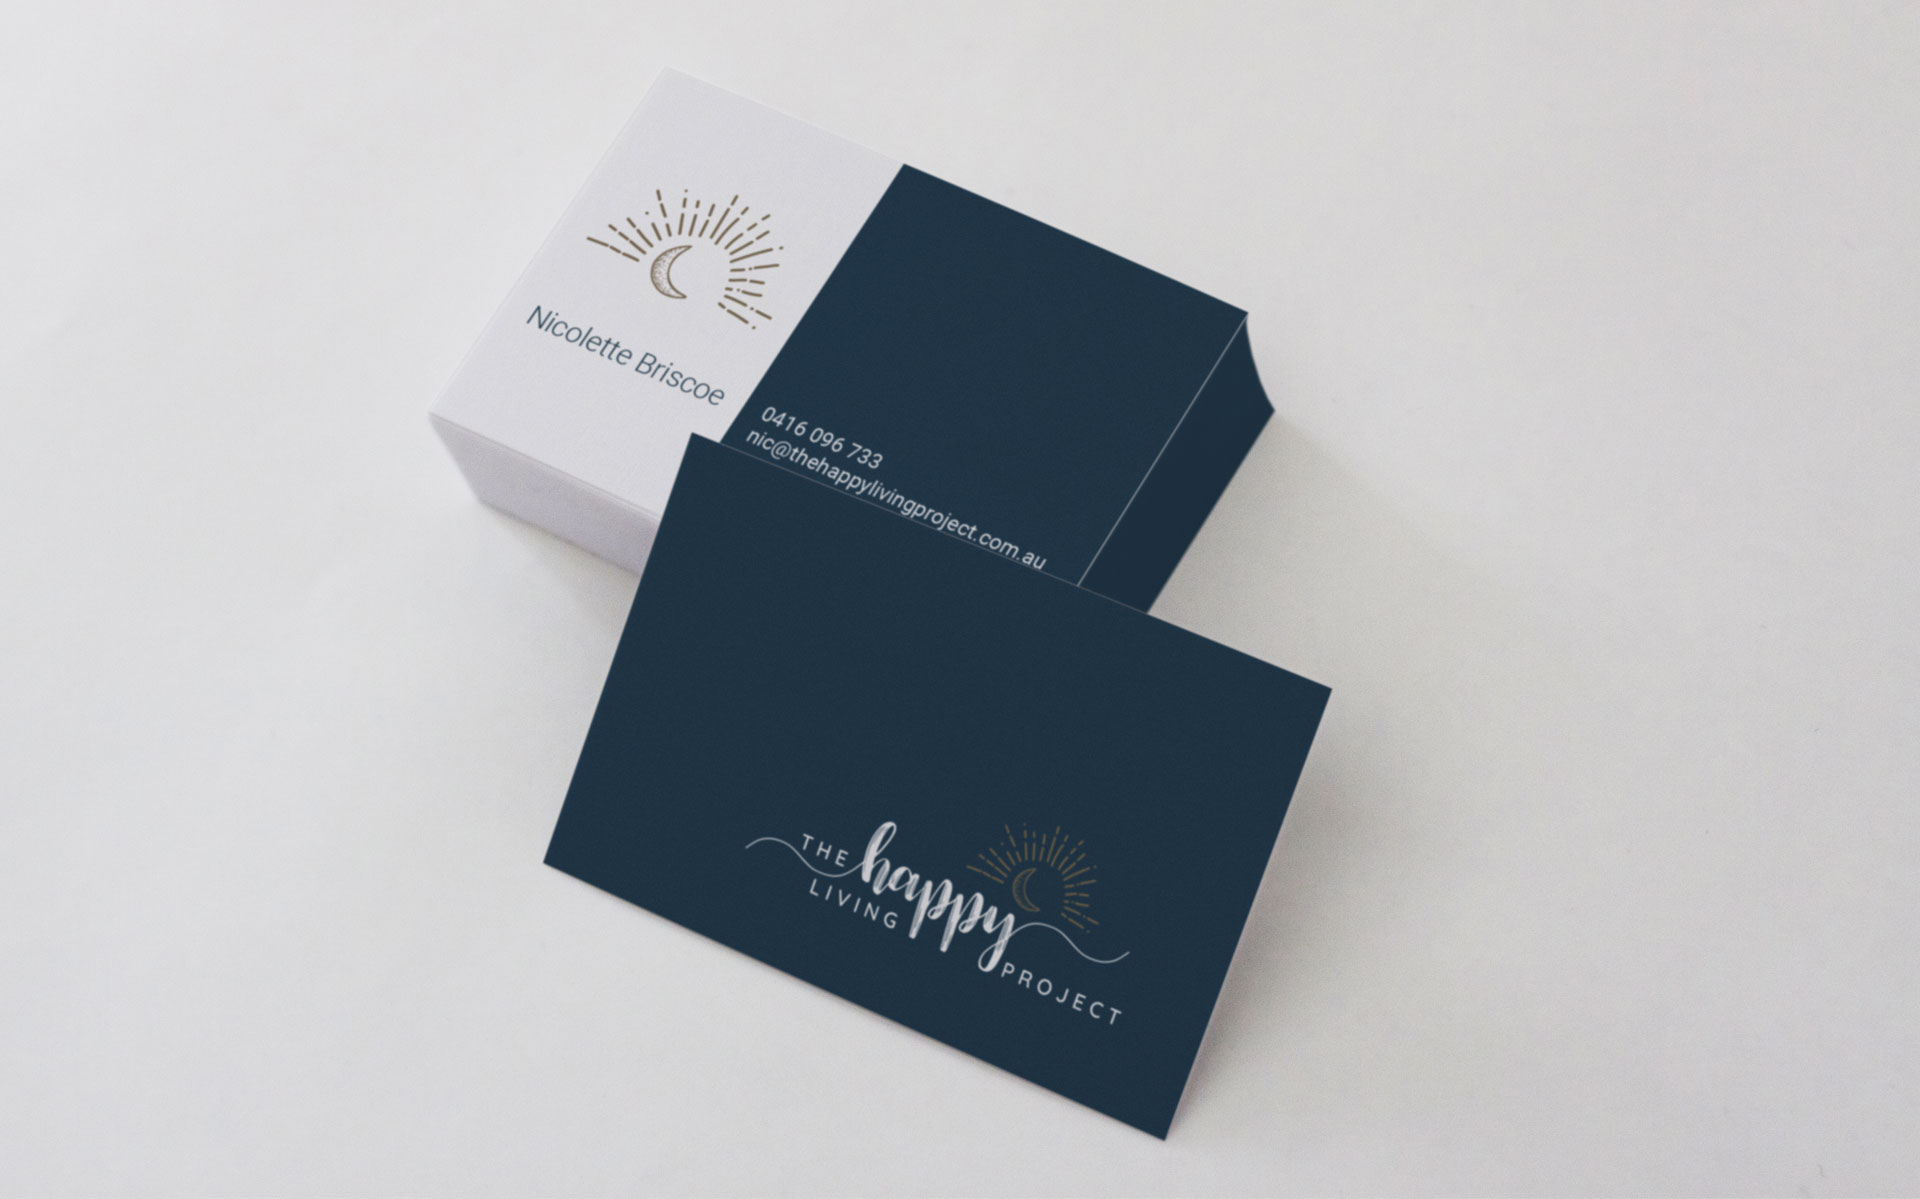 The Happy Living Project branding, marketing & online work designed by Amy at Yellow Sunday